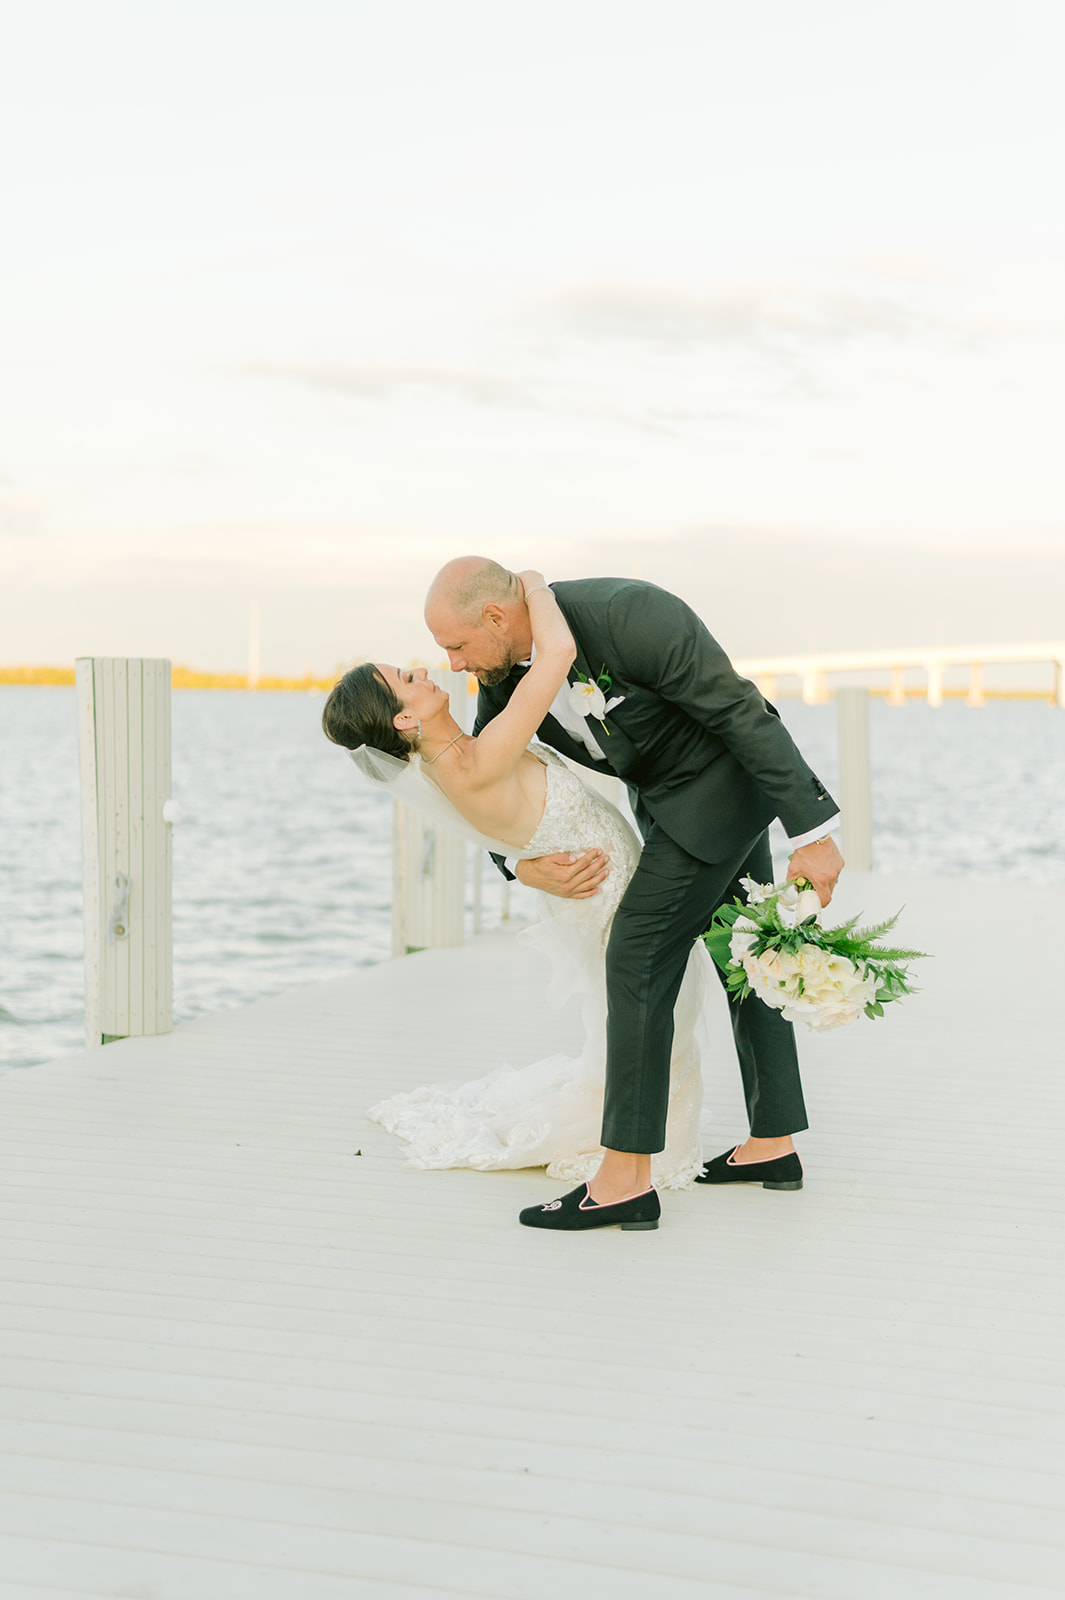 Expert Marco Island Photographer - Capturing Your Wedding Day Perfectly
